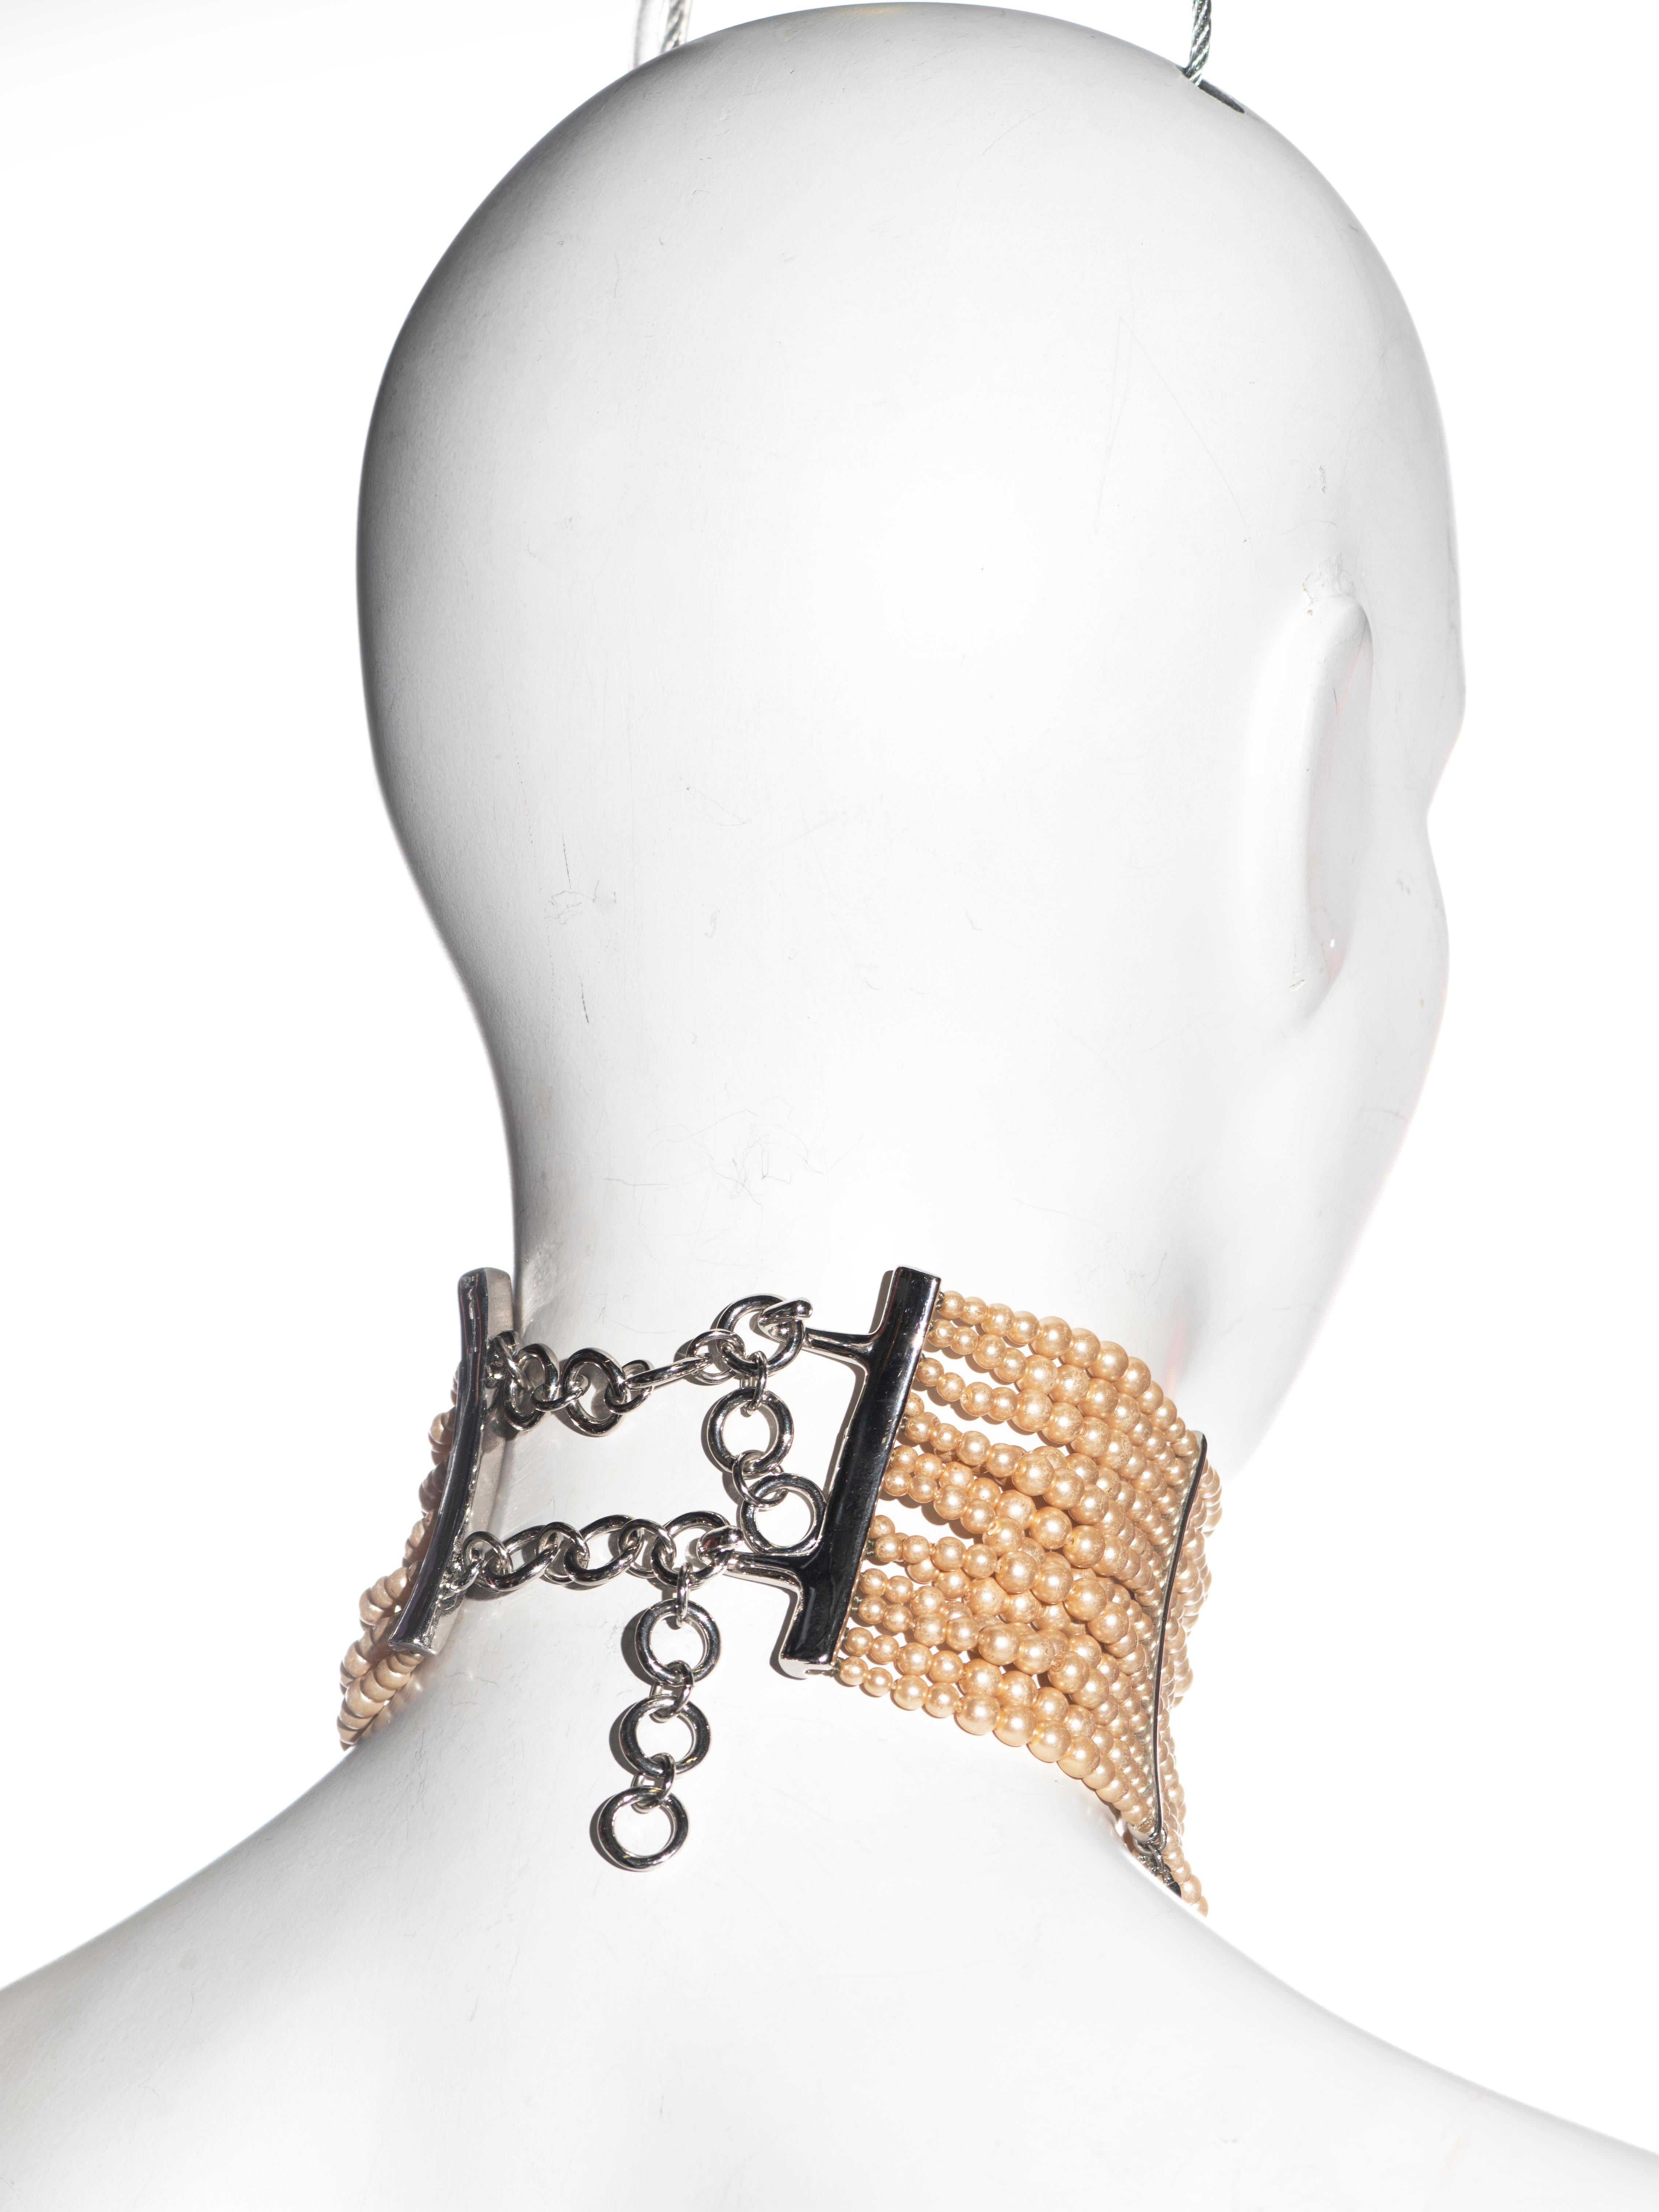 Christian Dior by John Galliano pearl choker necklace, ss 1998 3